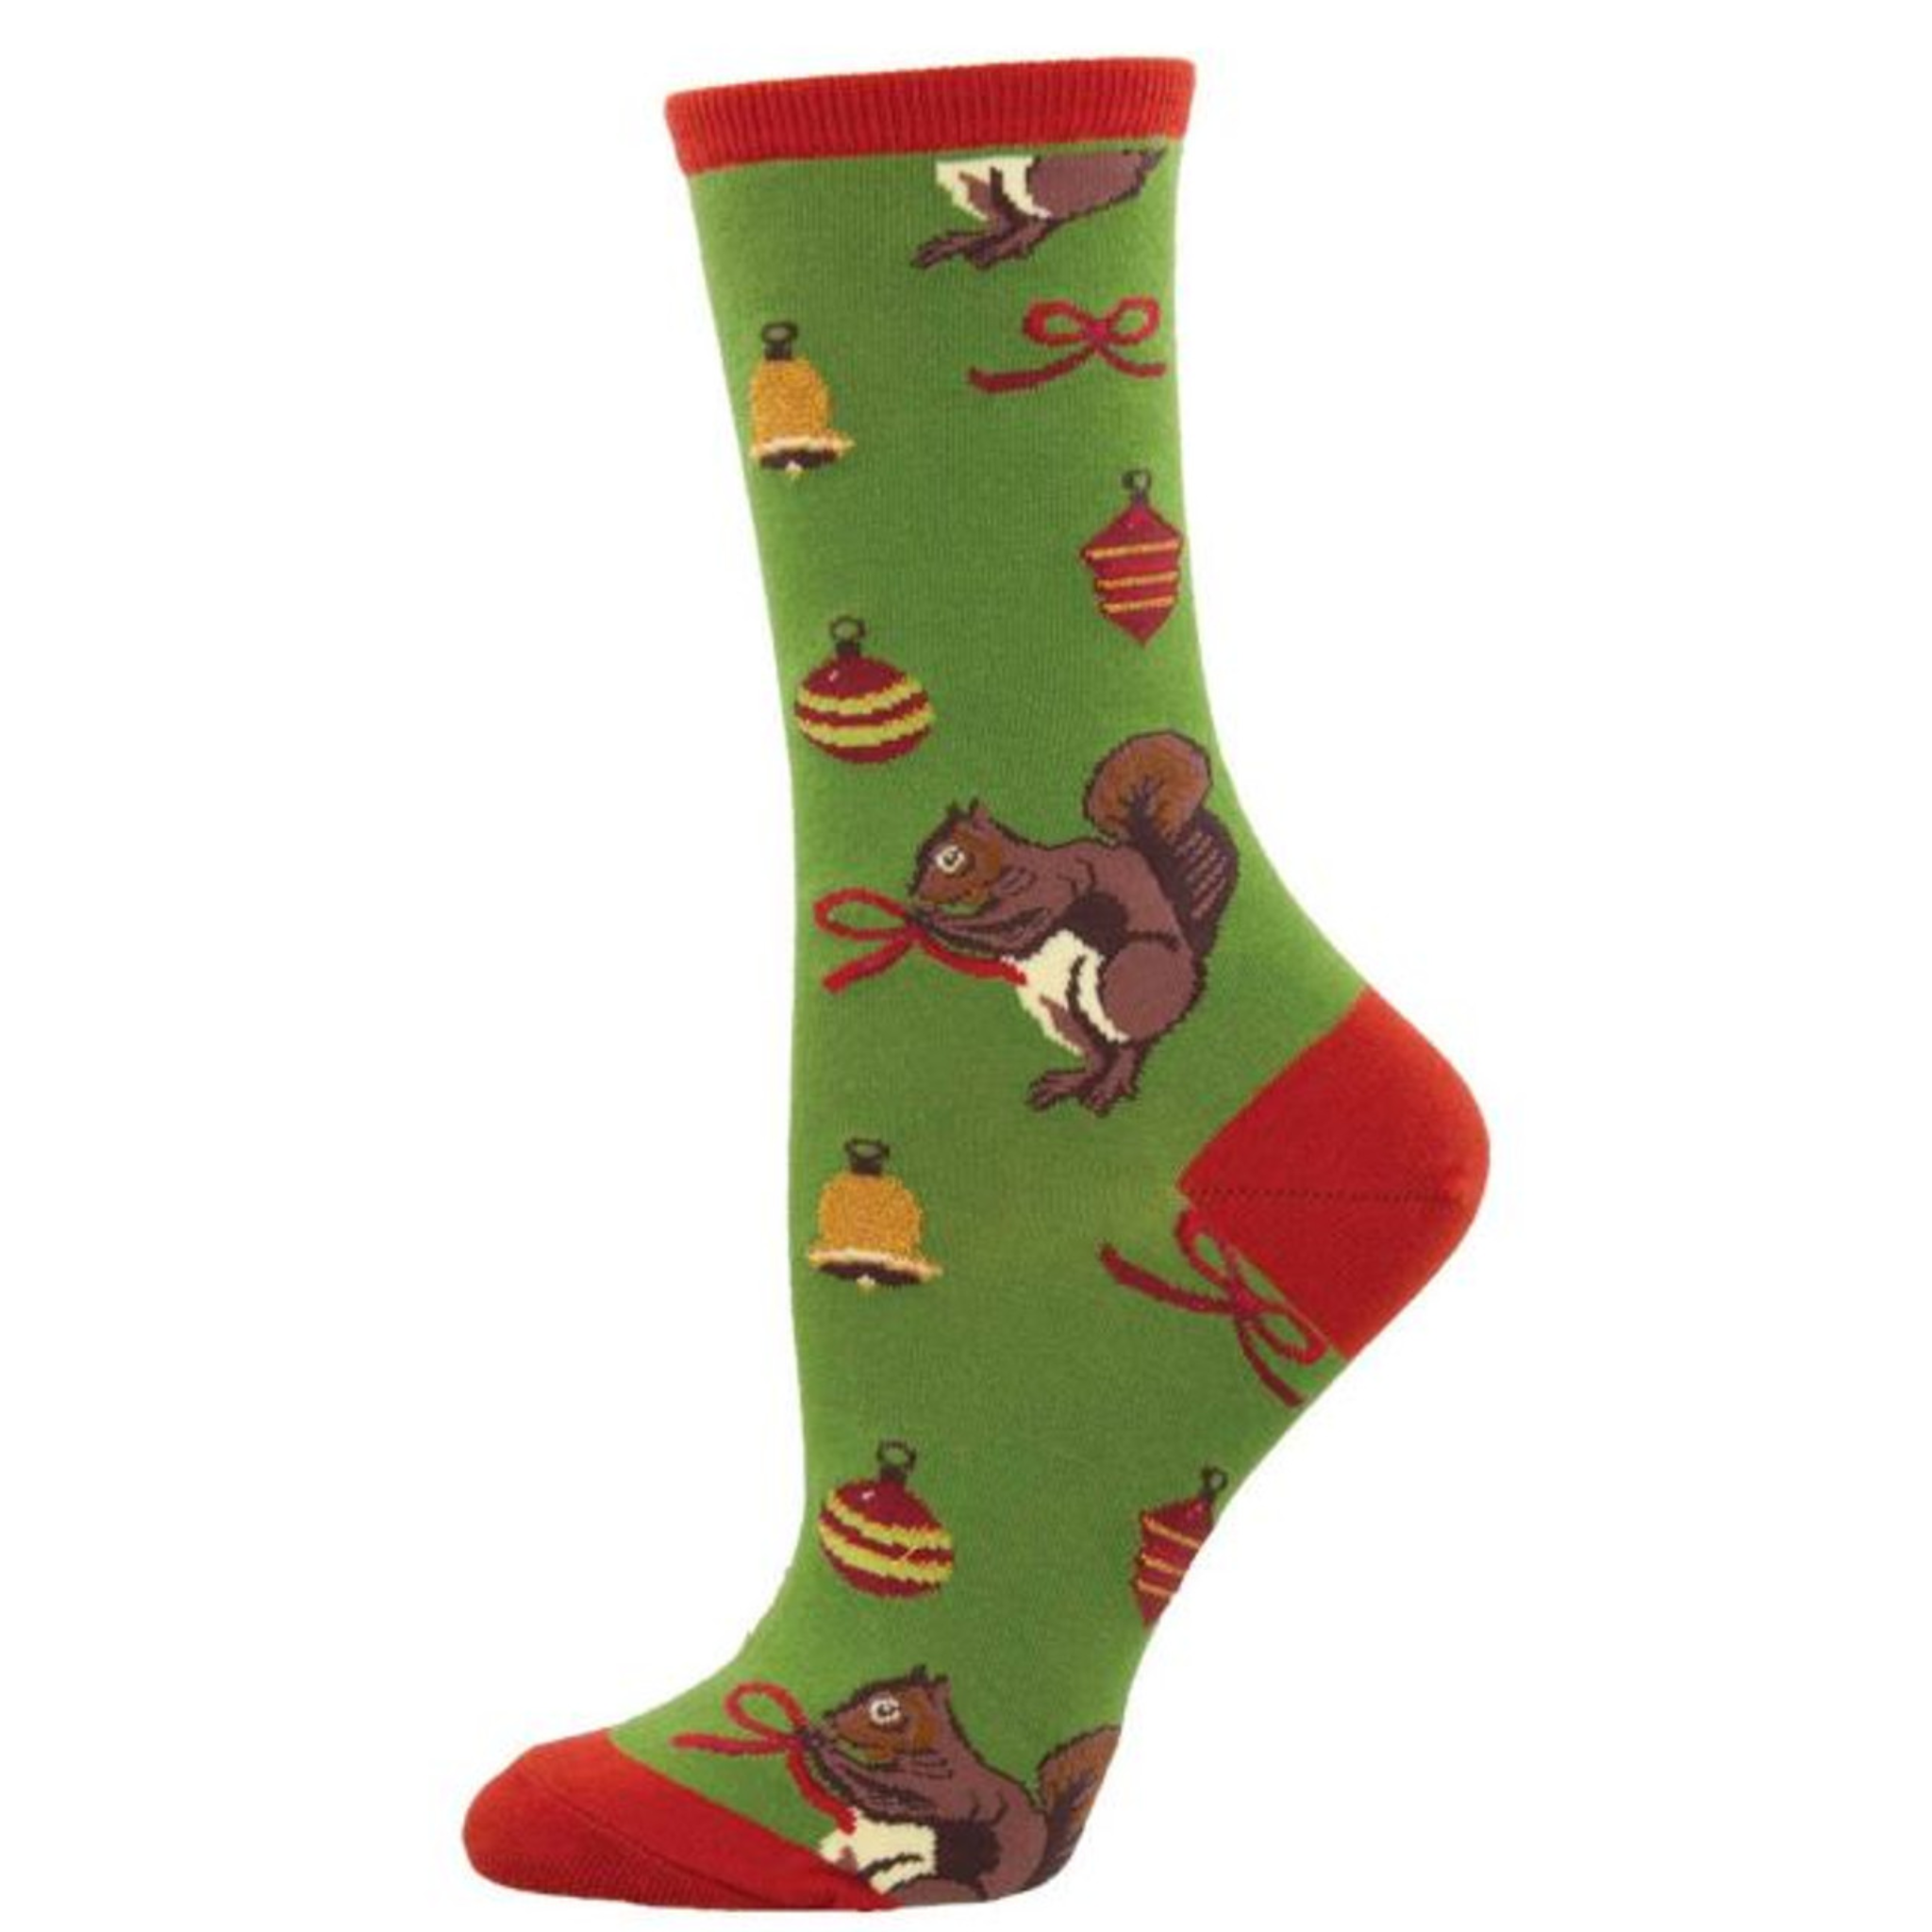 Have a Squirrelly Christmas (Women's)